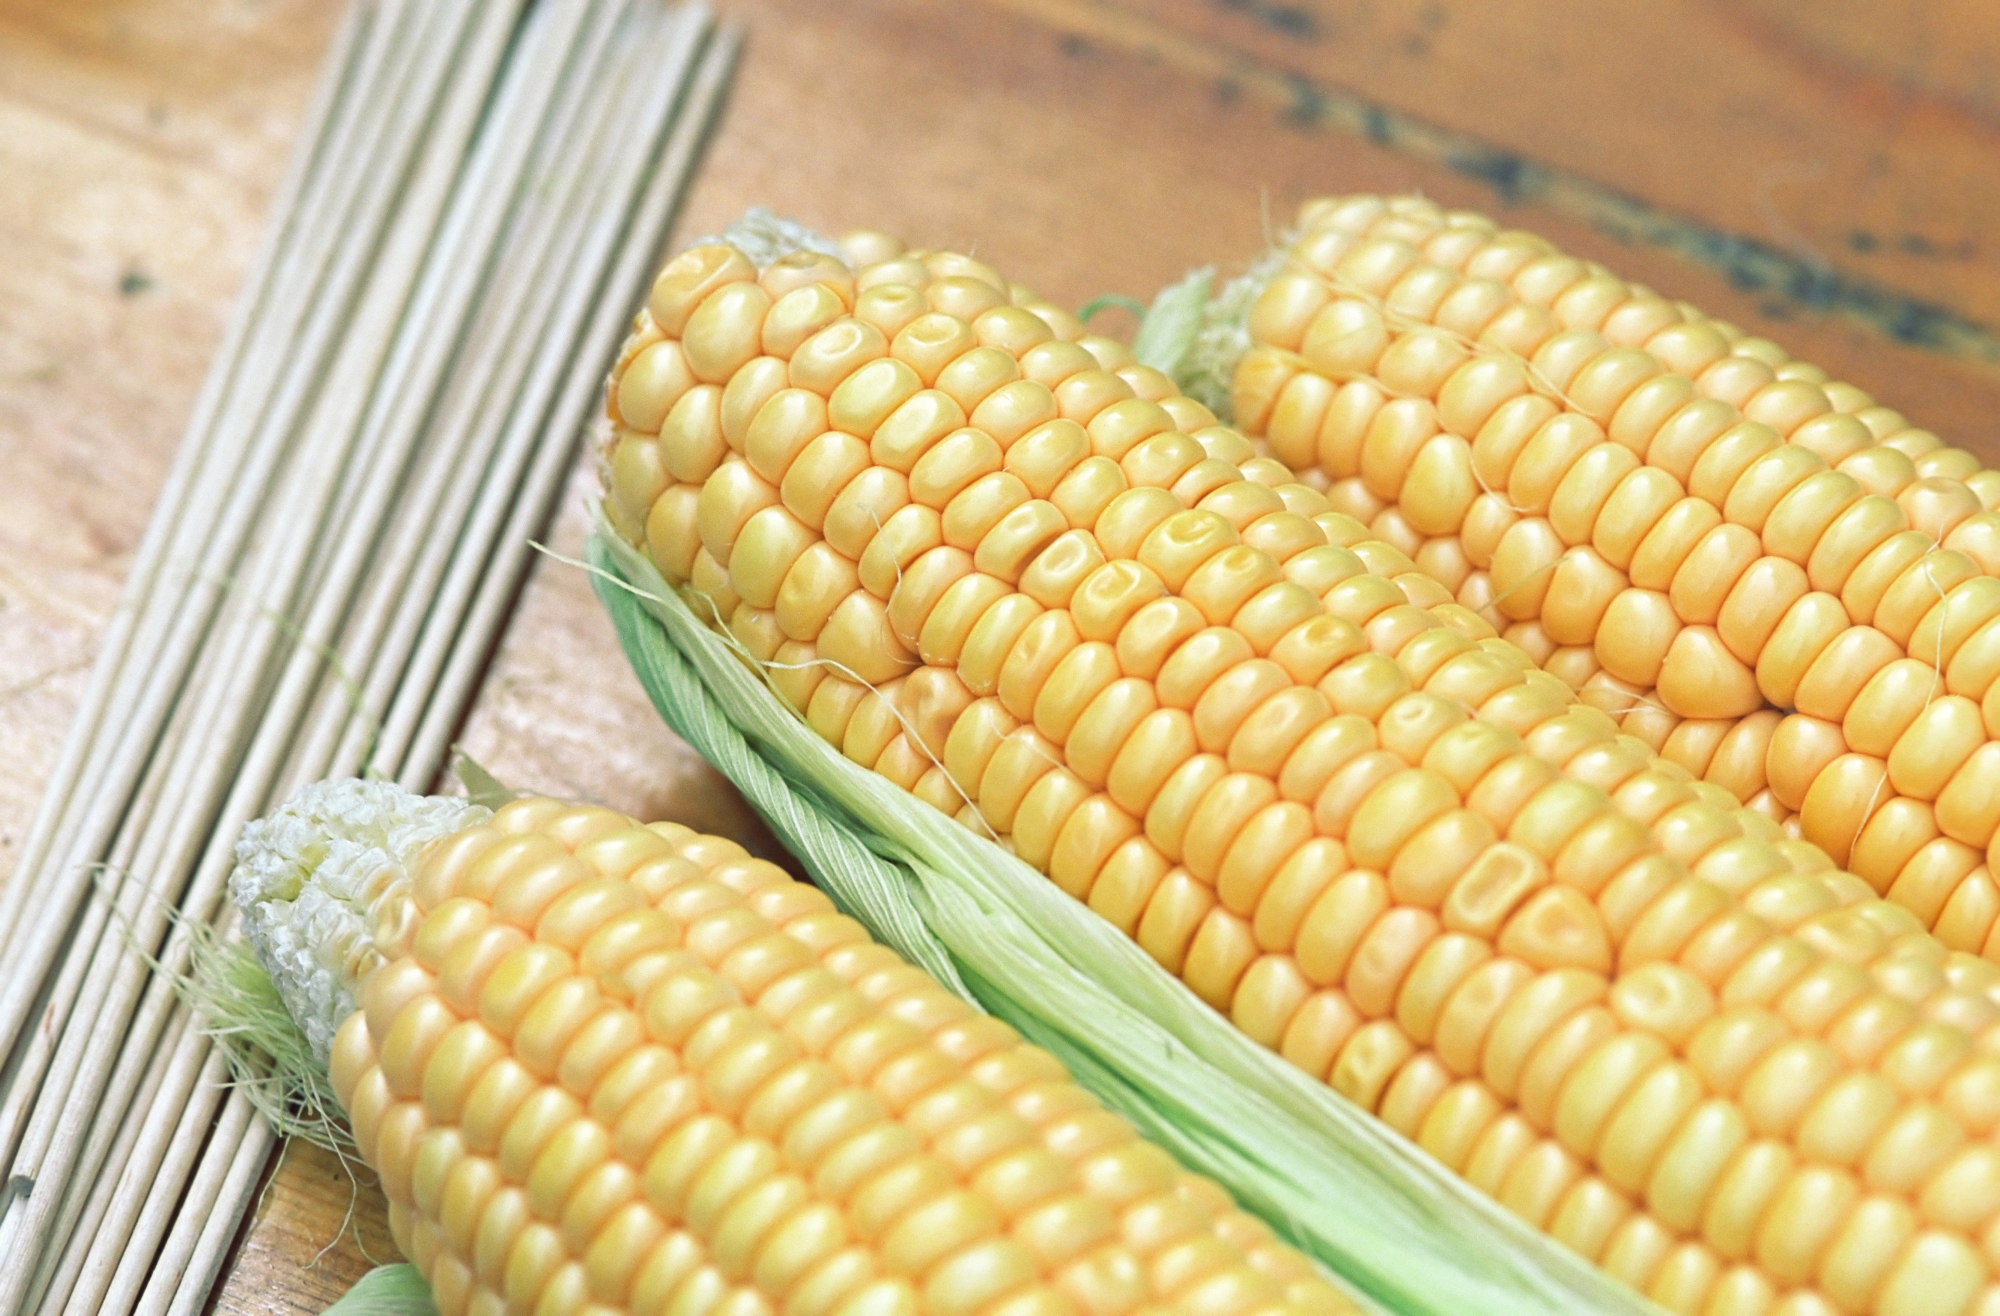 Corn and soybean ingredients, sugar, and vegetable oils are the most commonly genetically engineered products.